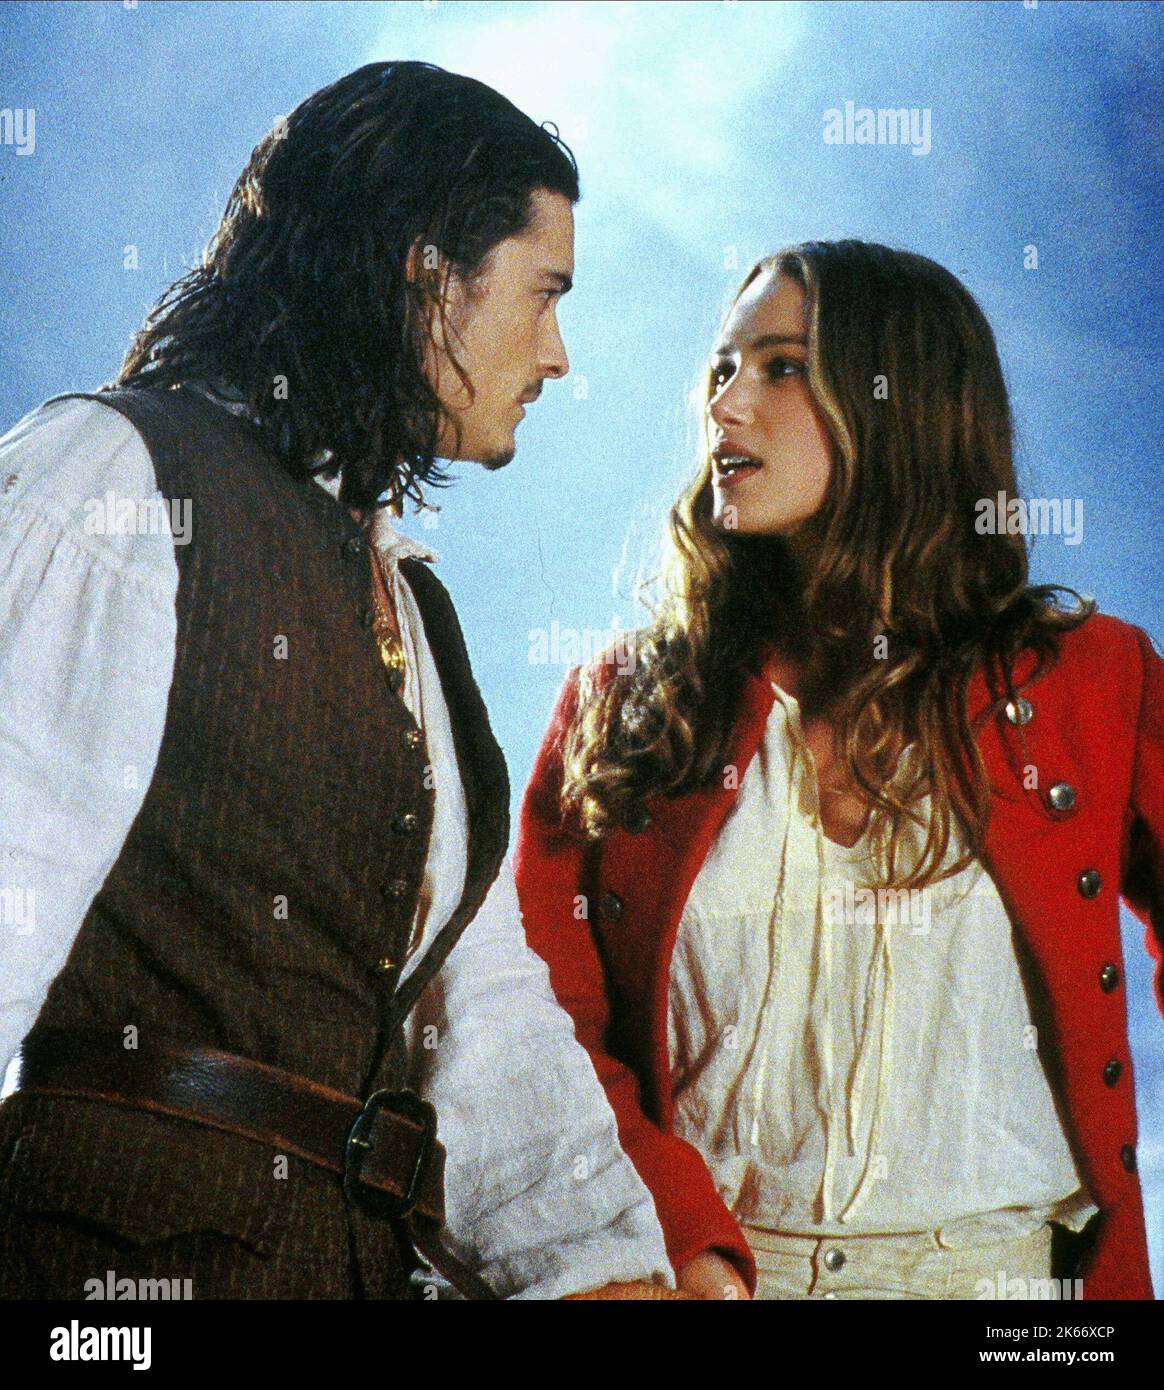 ORLANDO BLOOM, KEIRA KNIGHTLEY, PIRATES OF THE CARIBBEAN: THE CURSE OF THE BLACK PEARL, 2003 Stock Photo